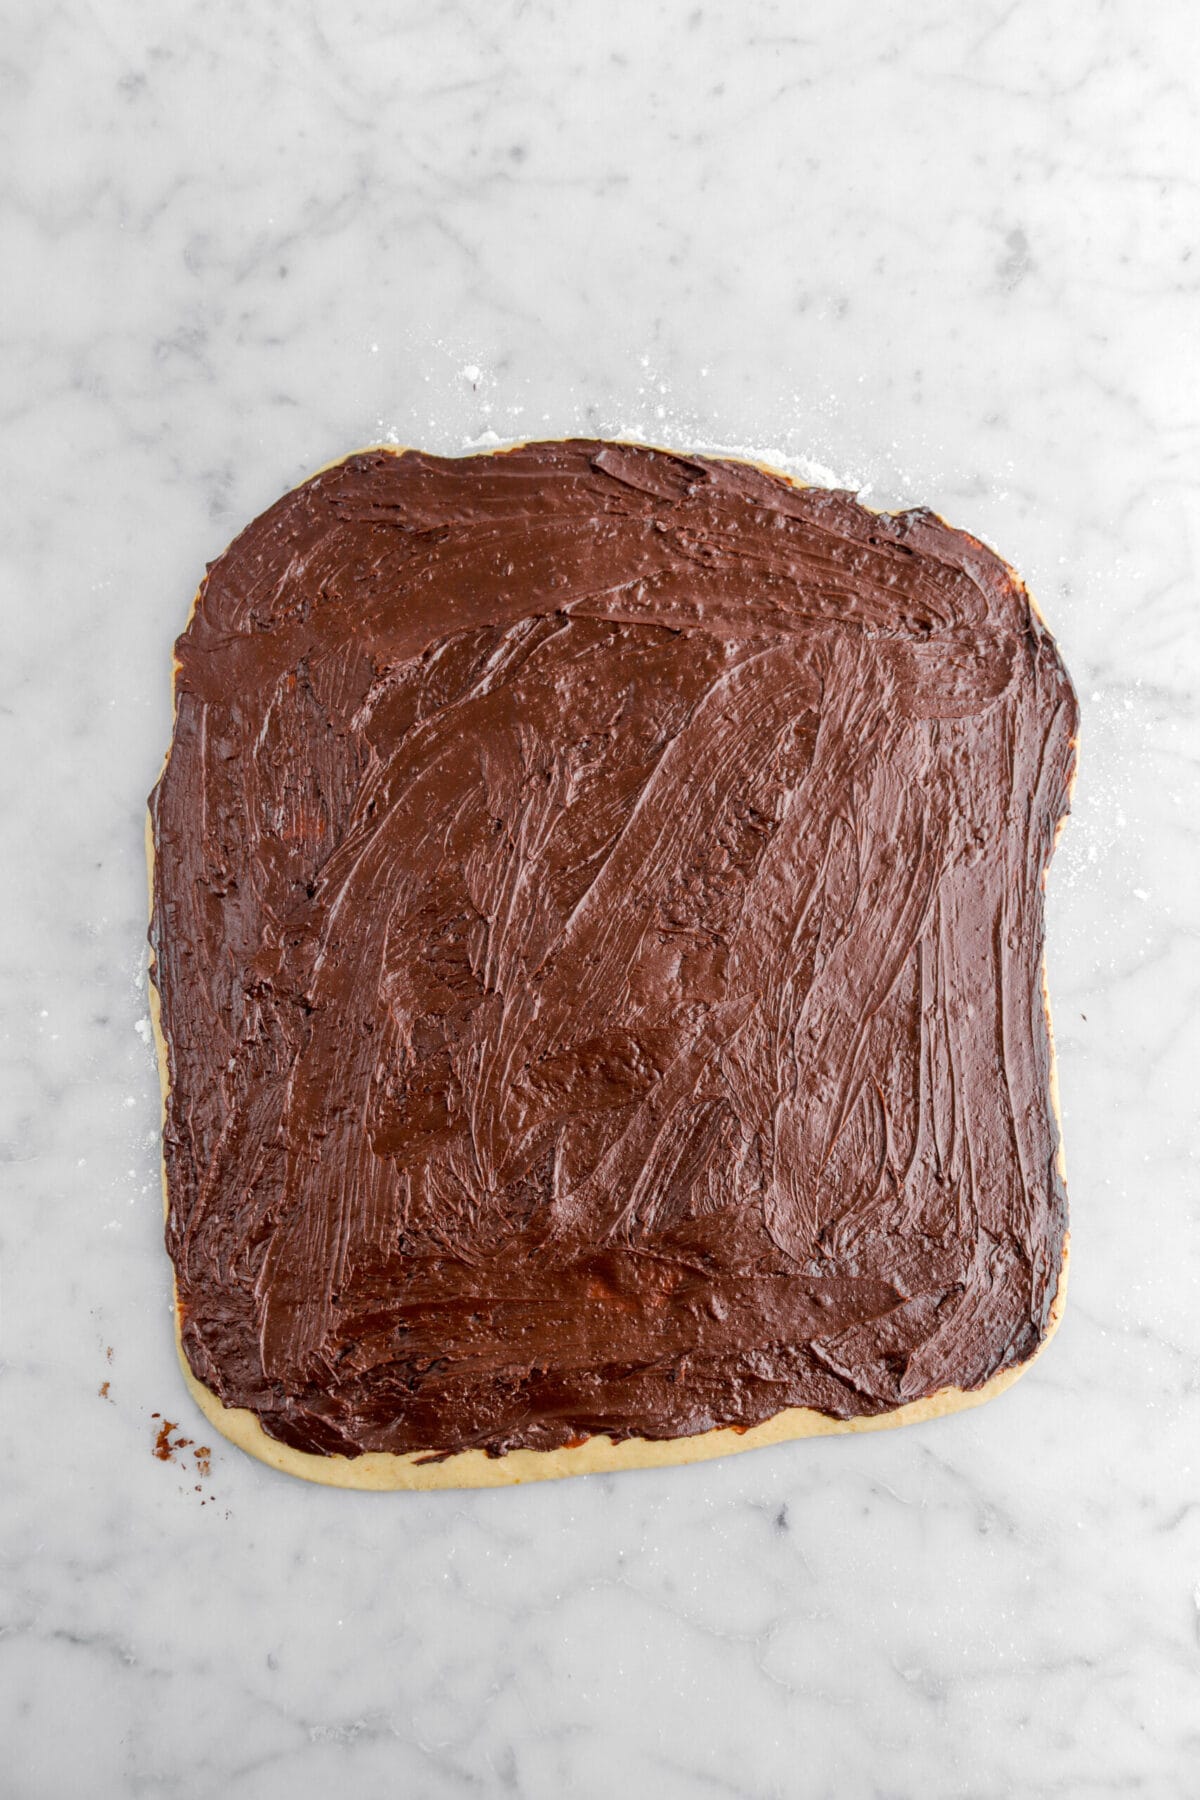 ganache spread across rolled out dough.